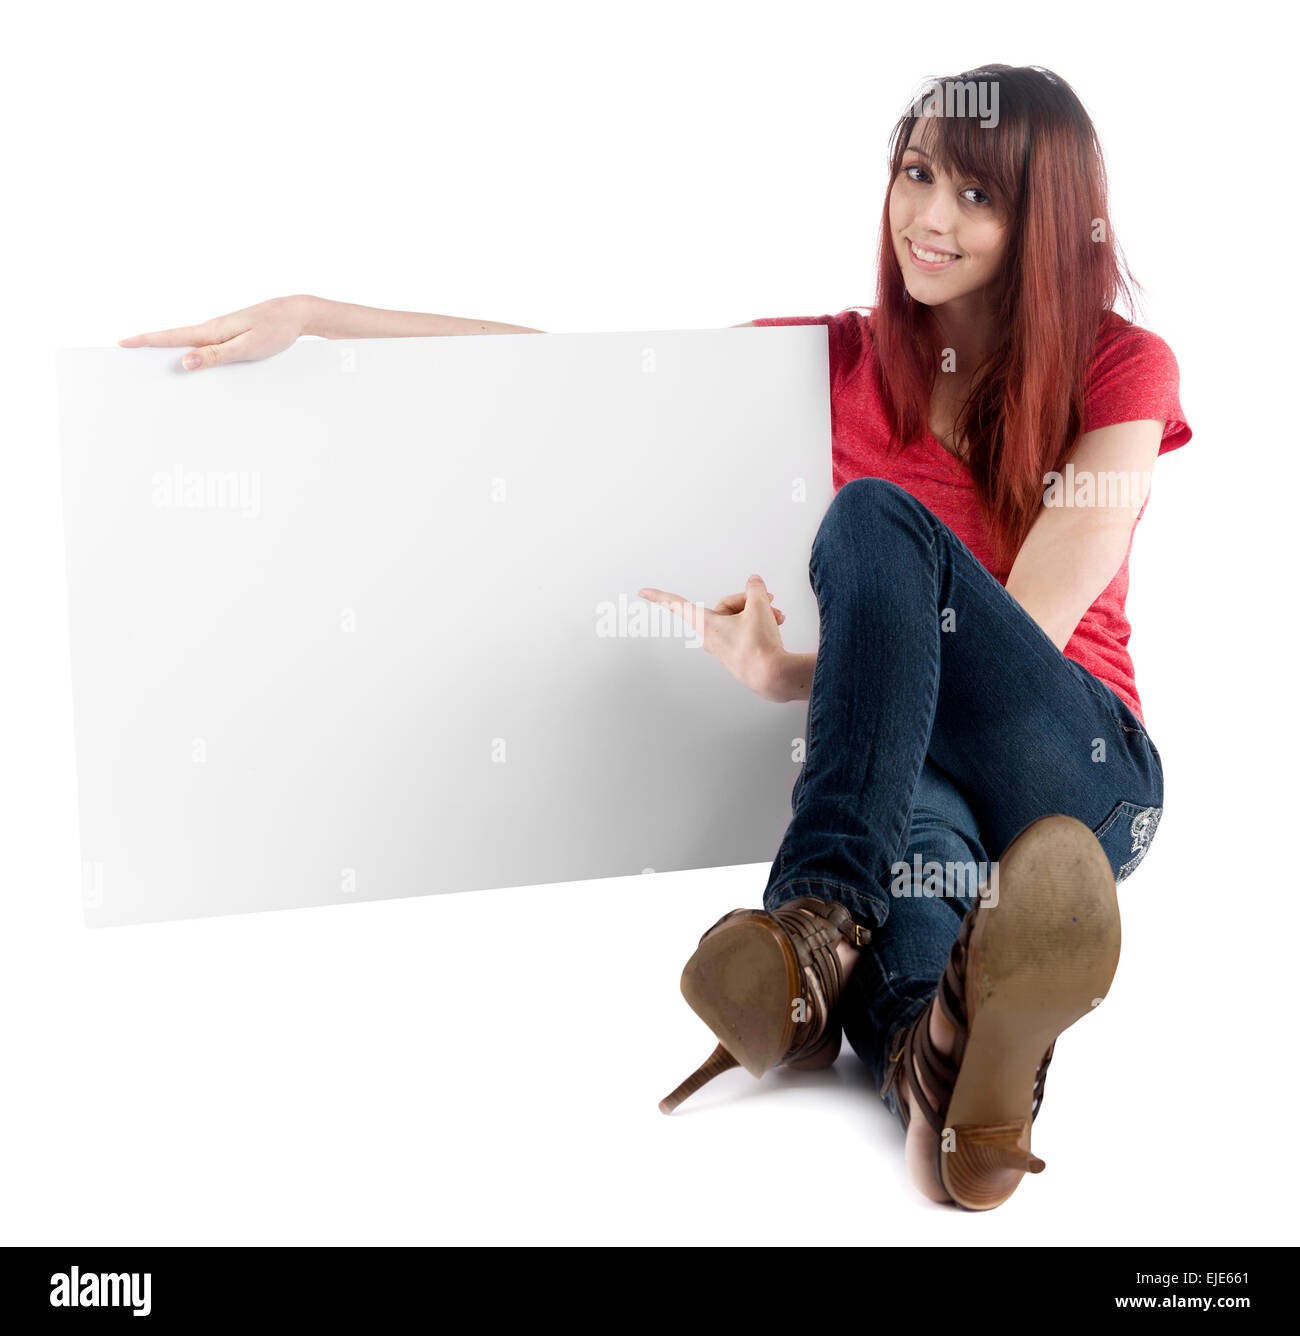 Sitting Woman Pointing at her Empty Cardboard Stock Photo